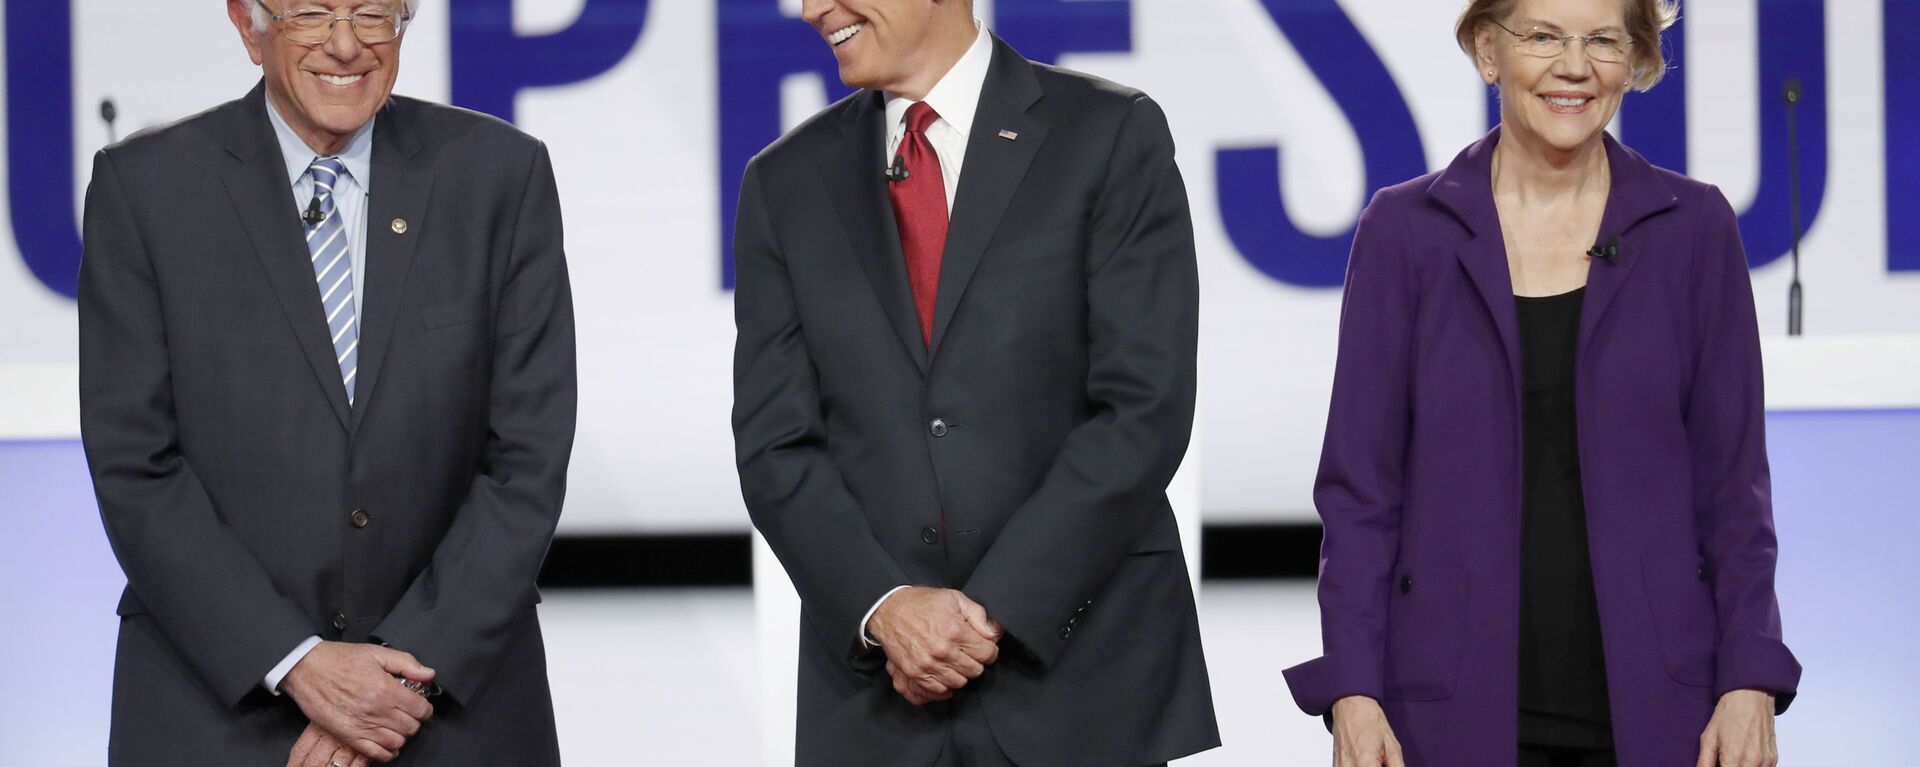 Democratic presidential candidate Sen. Bernie Sanders, I-Vt., former Vice President Joe Biden, center, and Sen. Elizabeth Warren, D-Mass., right, stand on stage before a Democratic presidential primary debate hosted by CNN and The New York Times at Otterbein University, Tuesday, Oct. 15, 2019, in Westerville, Ohio.  - Sputnik International, 1920, 27.11.2020